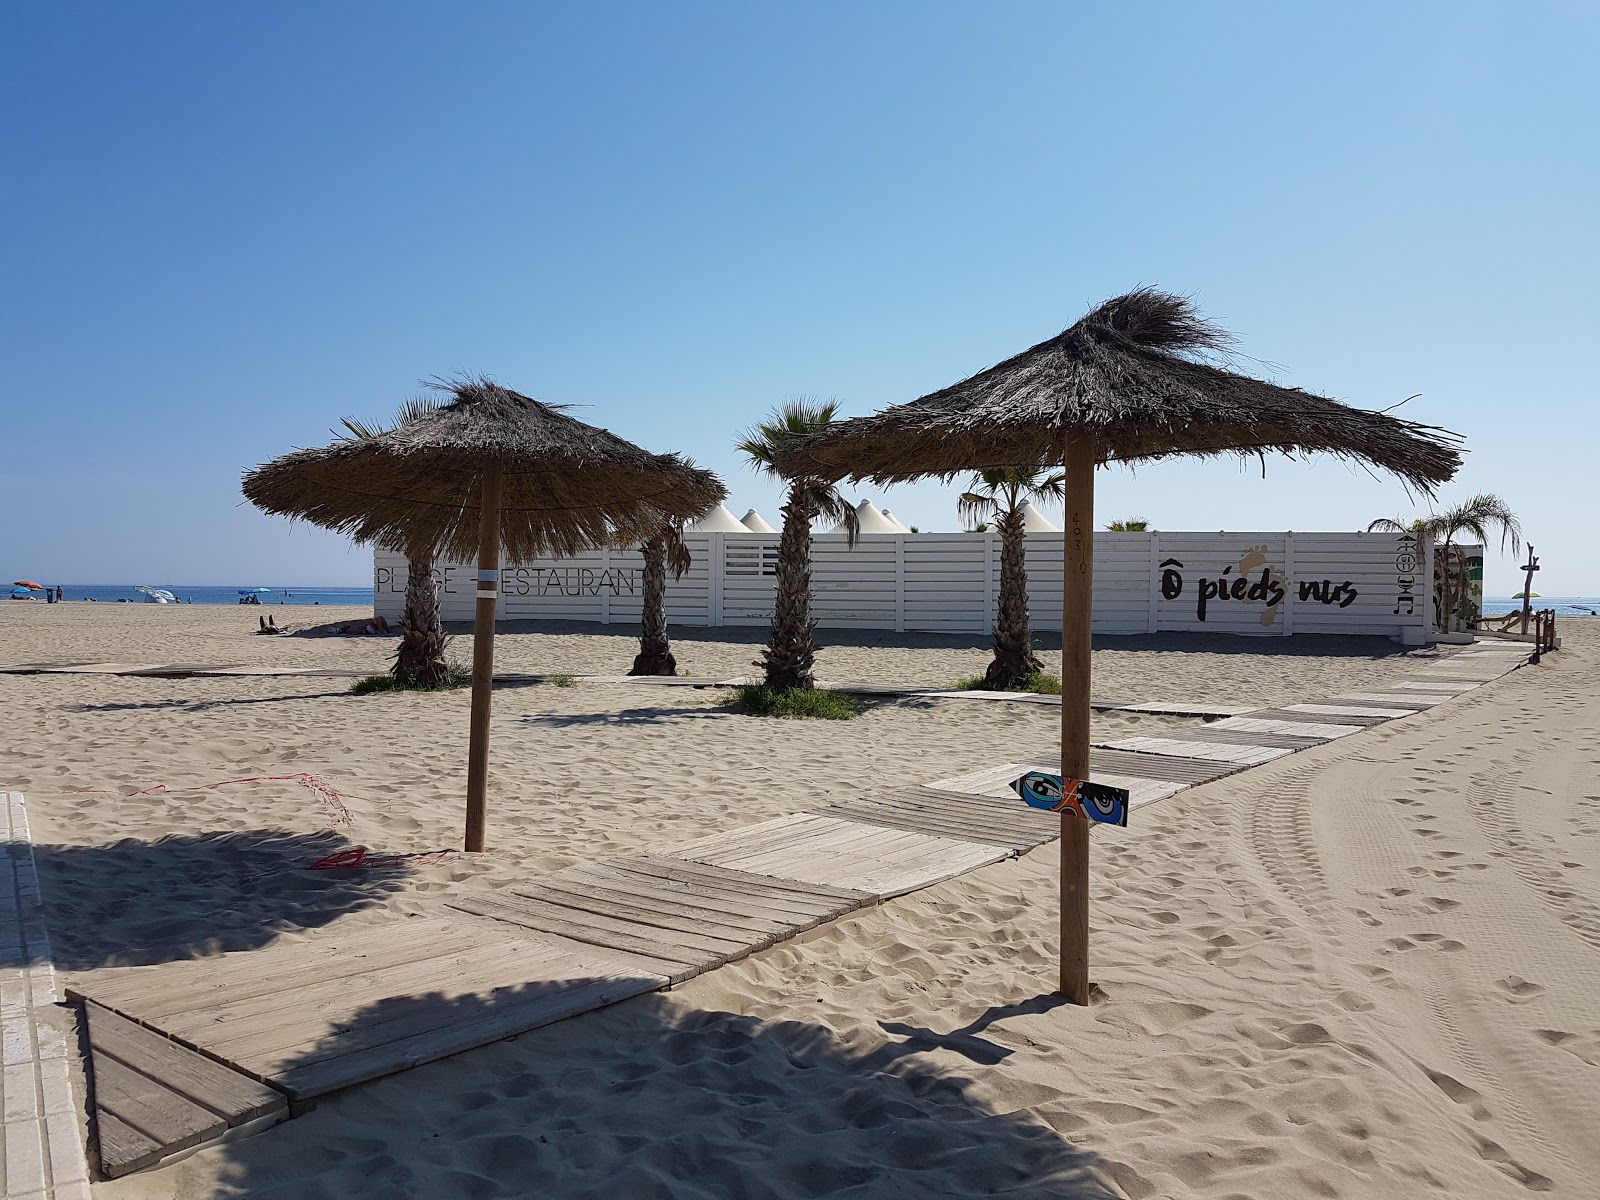 Photo of Canet in Roussillon - popular place among relax connoisseurs